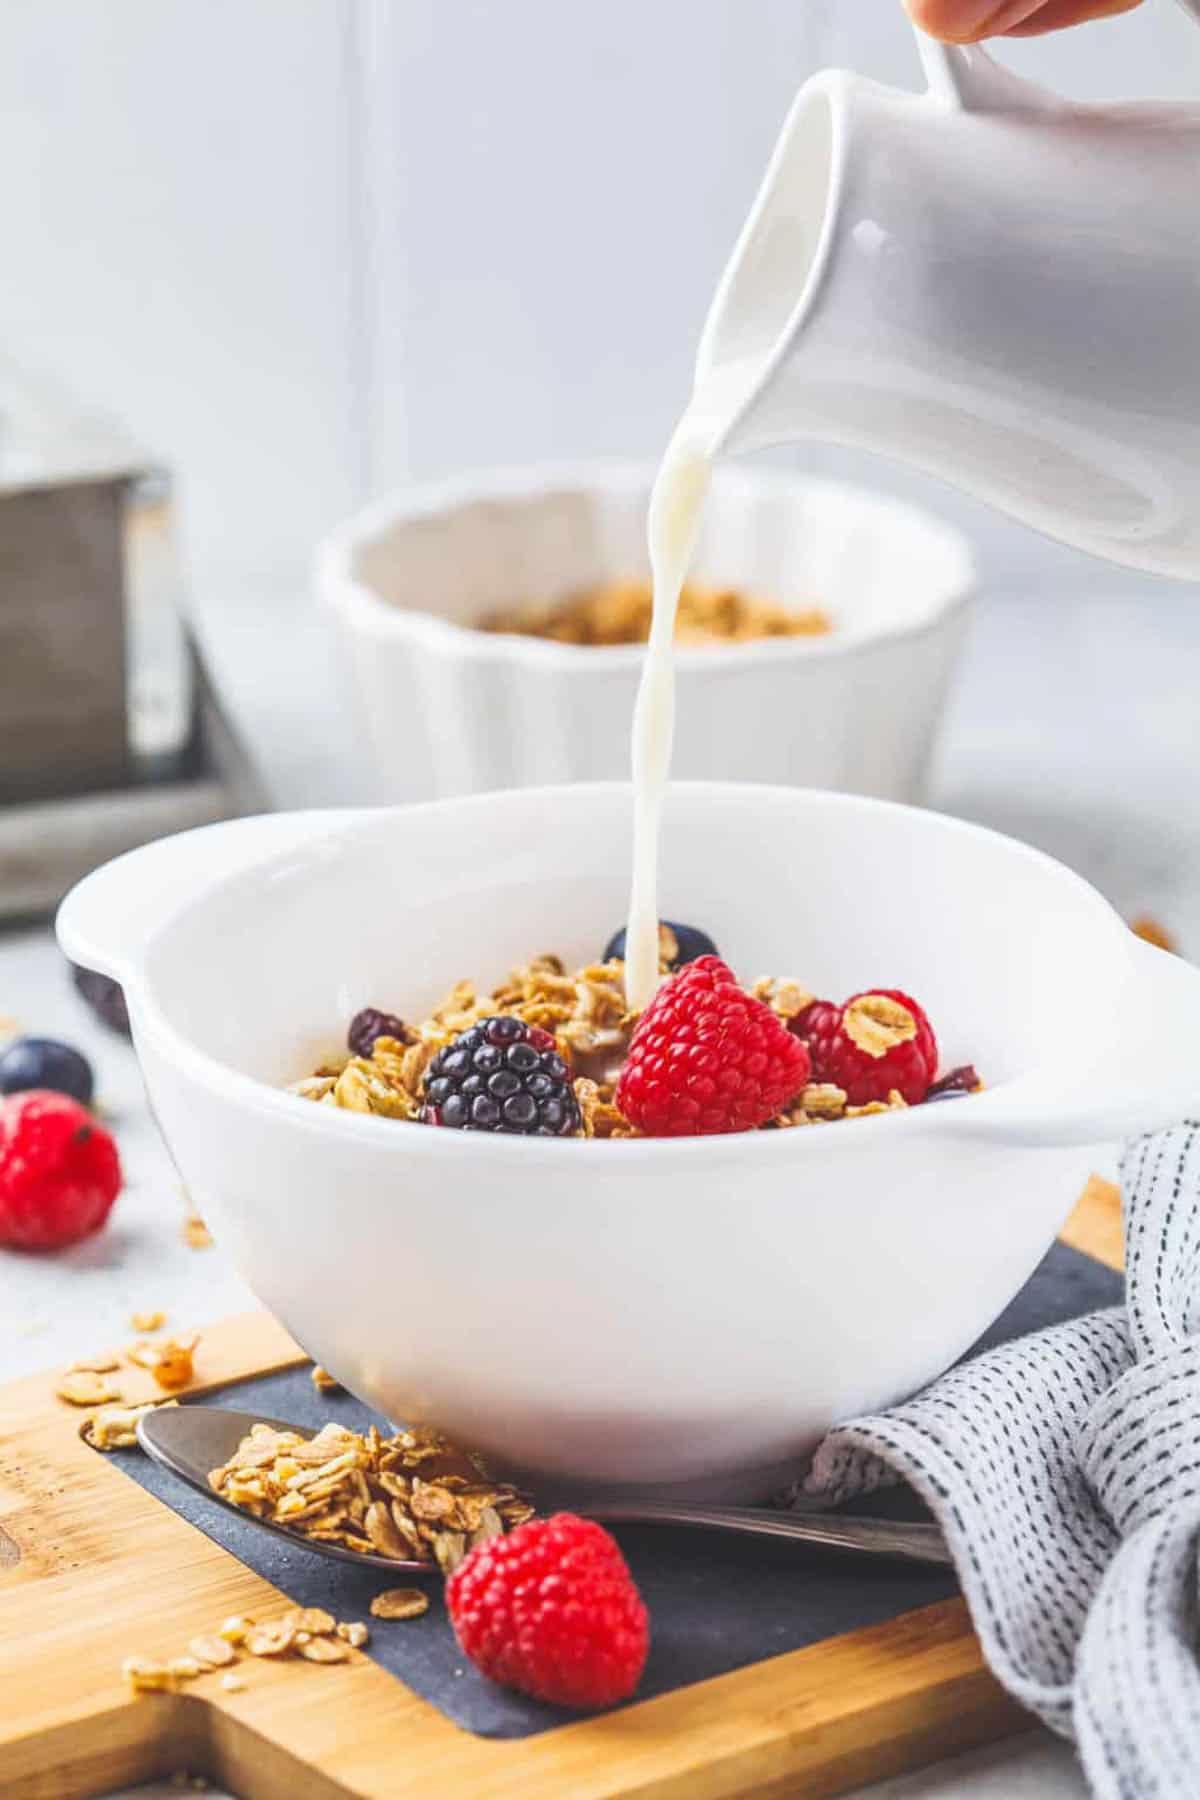 Pouring milk into a white bowl of granola with berries.